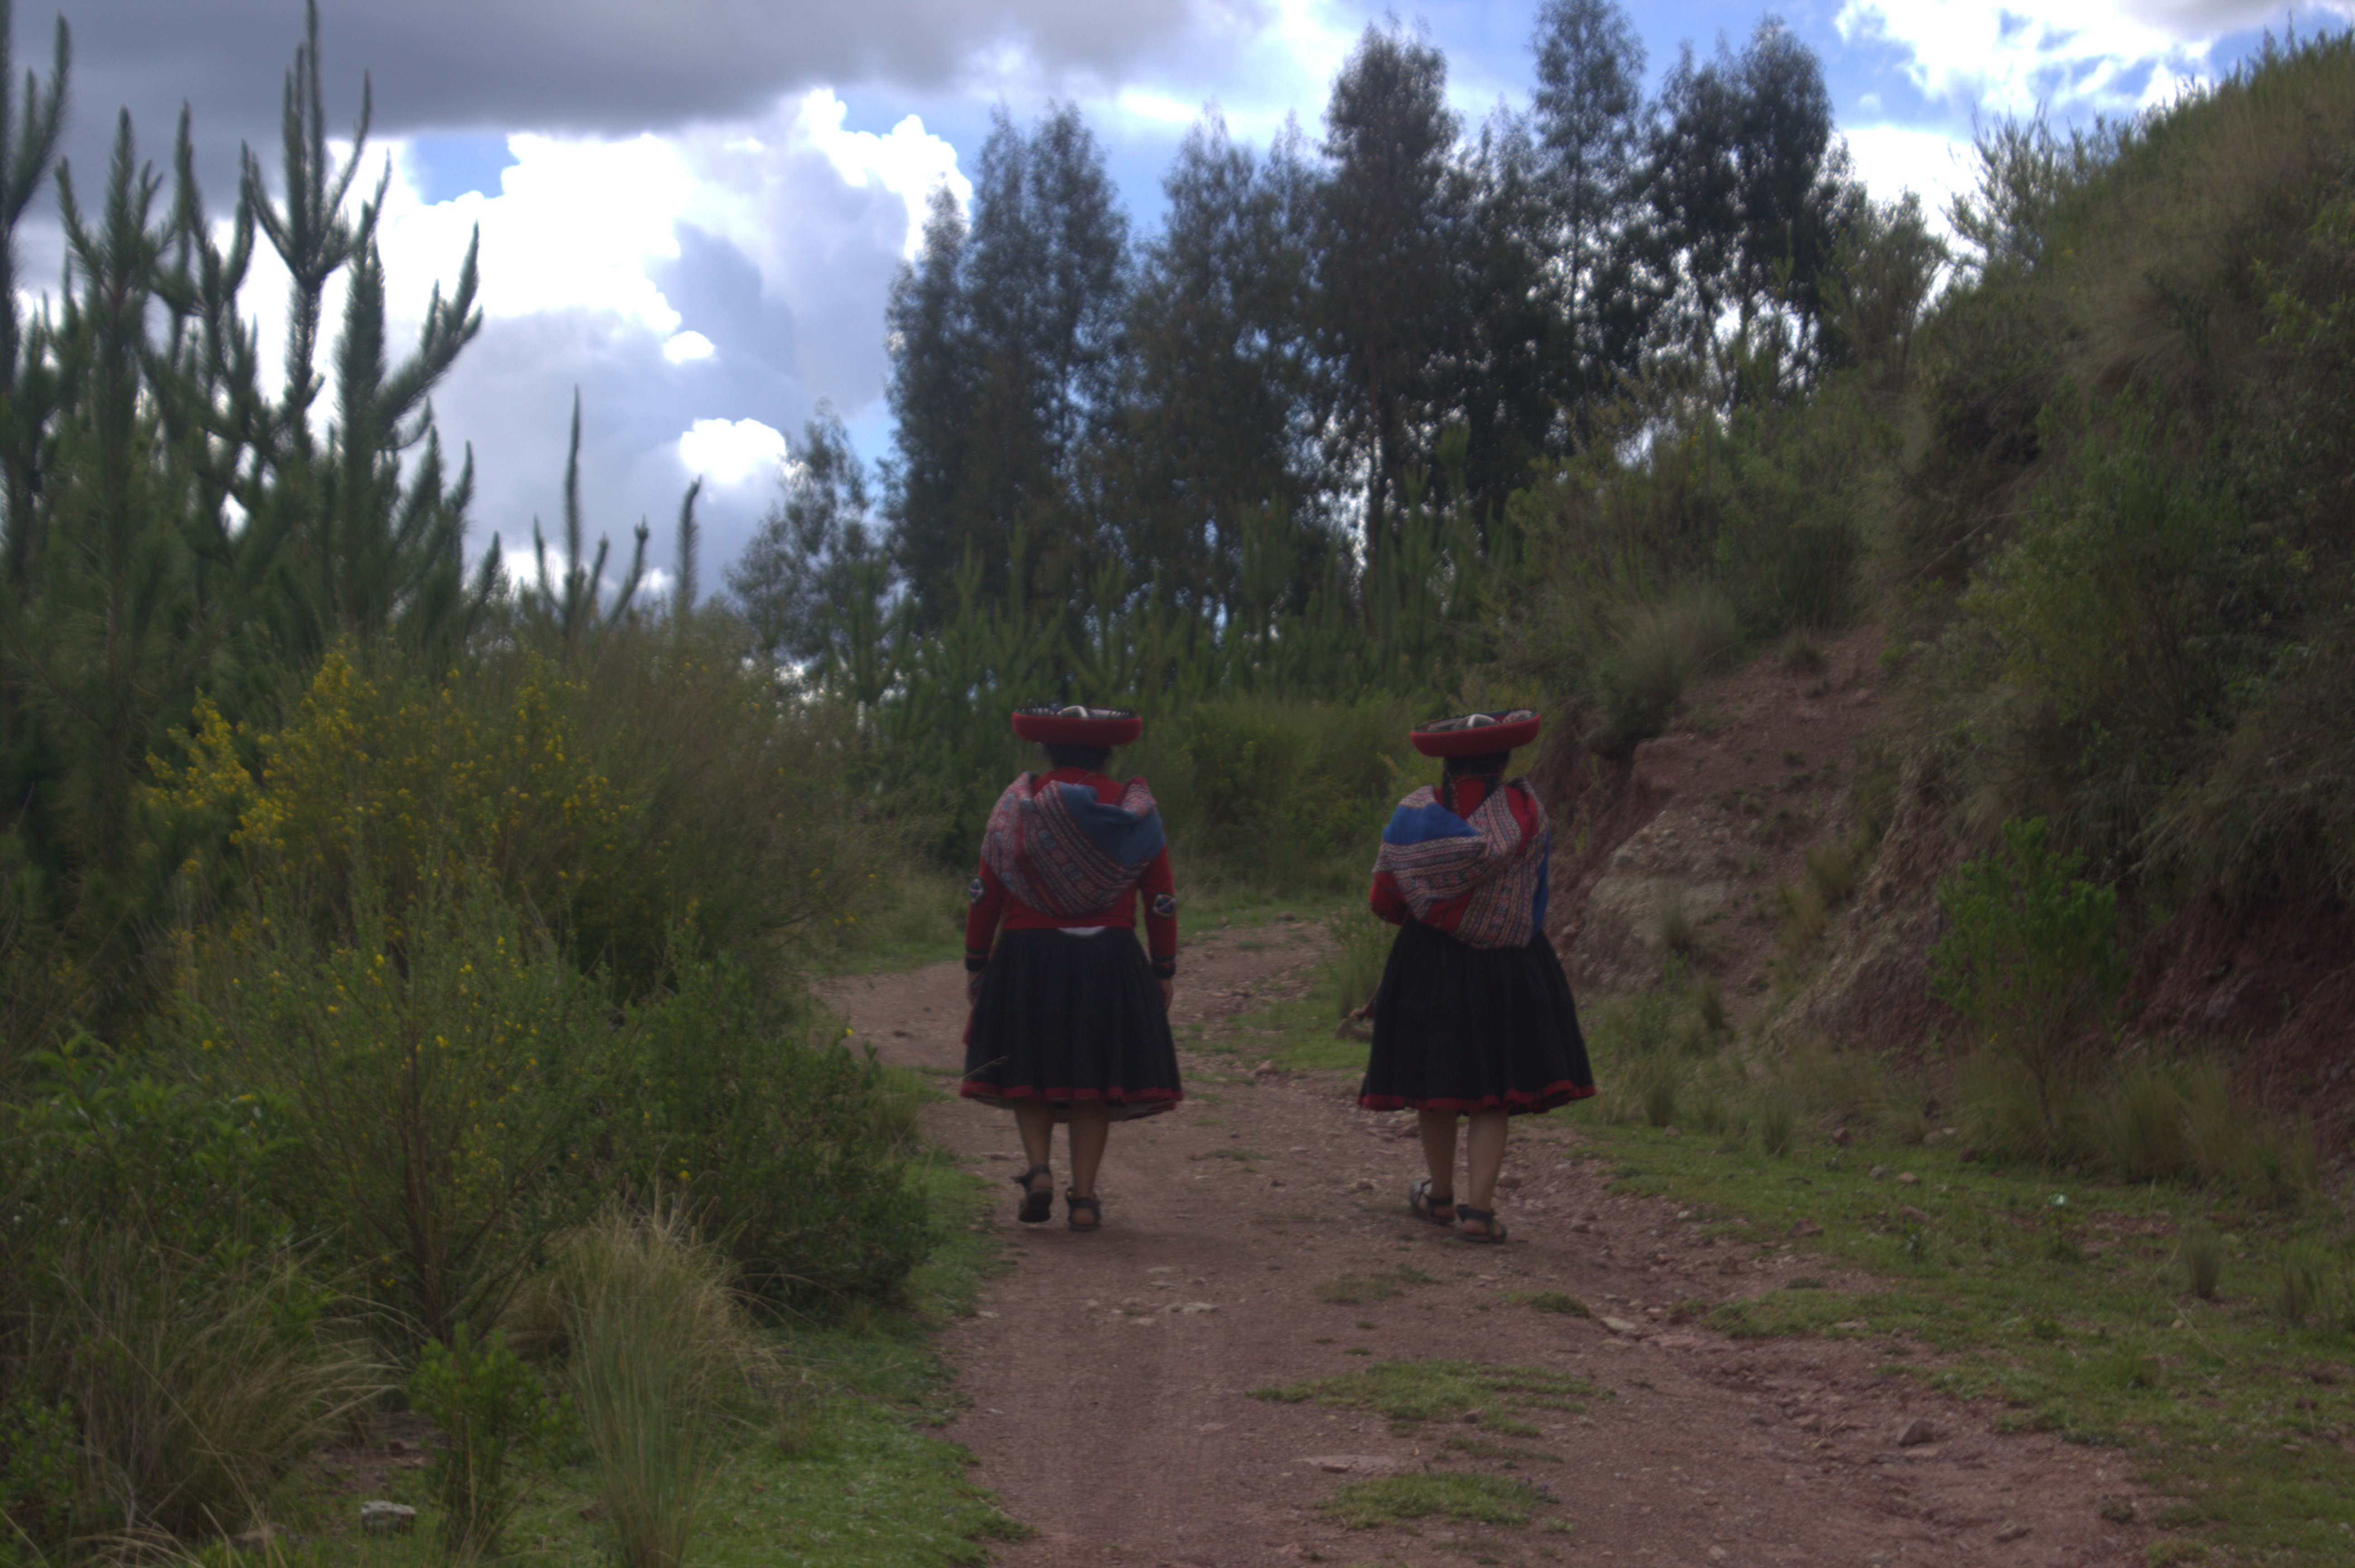 Urpis de Antaquillka Community Read this interview and learn more about Urpis de Antaquillka , the women’s association of the Andean community of Cuper Bajo.